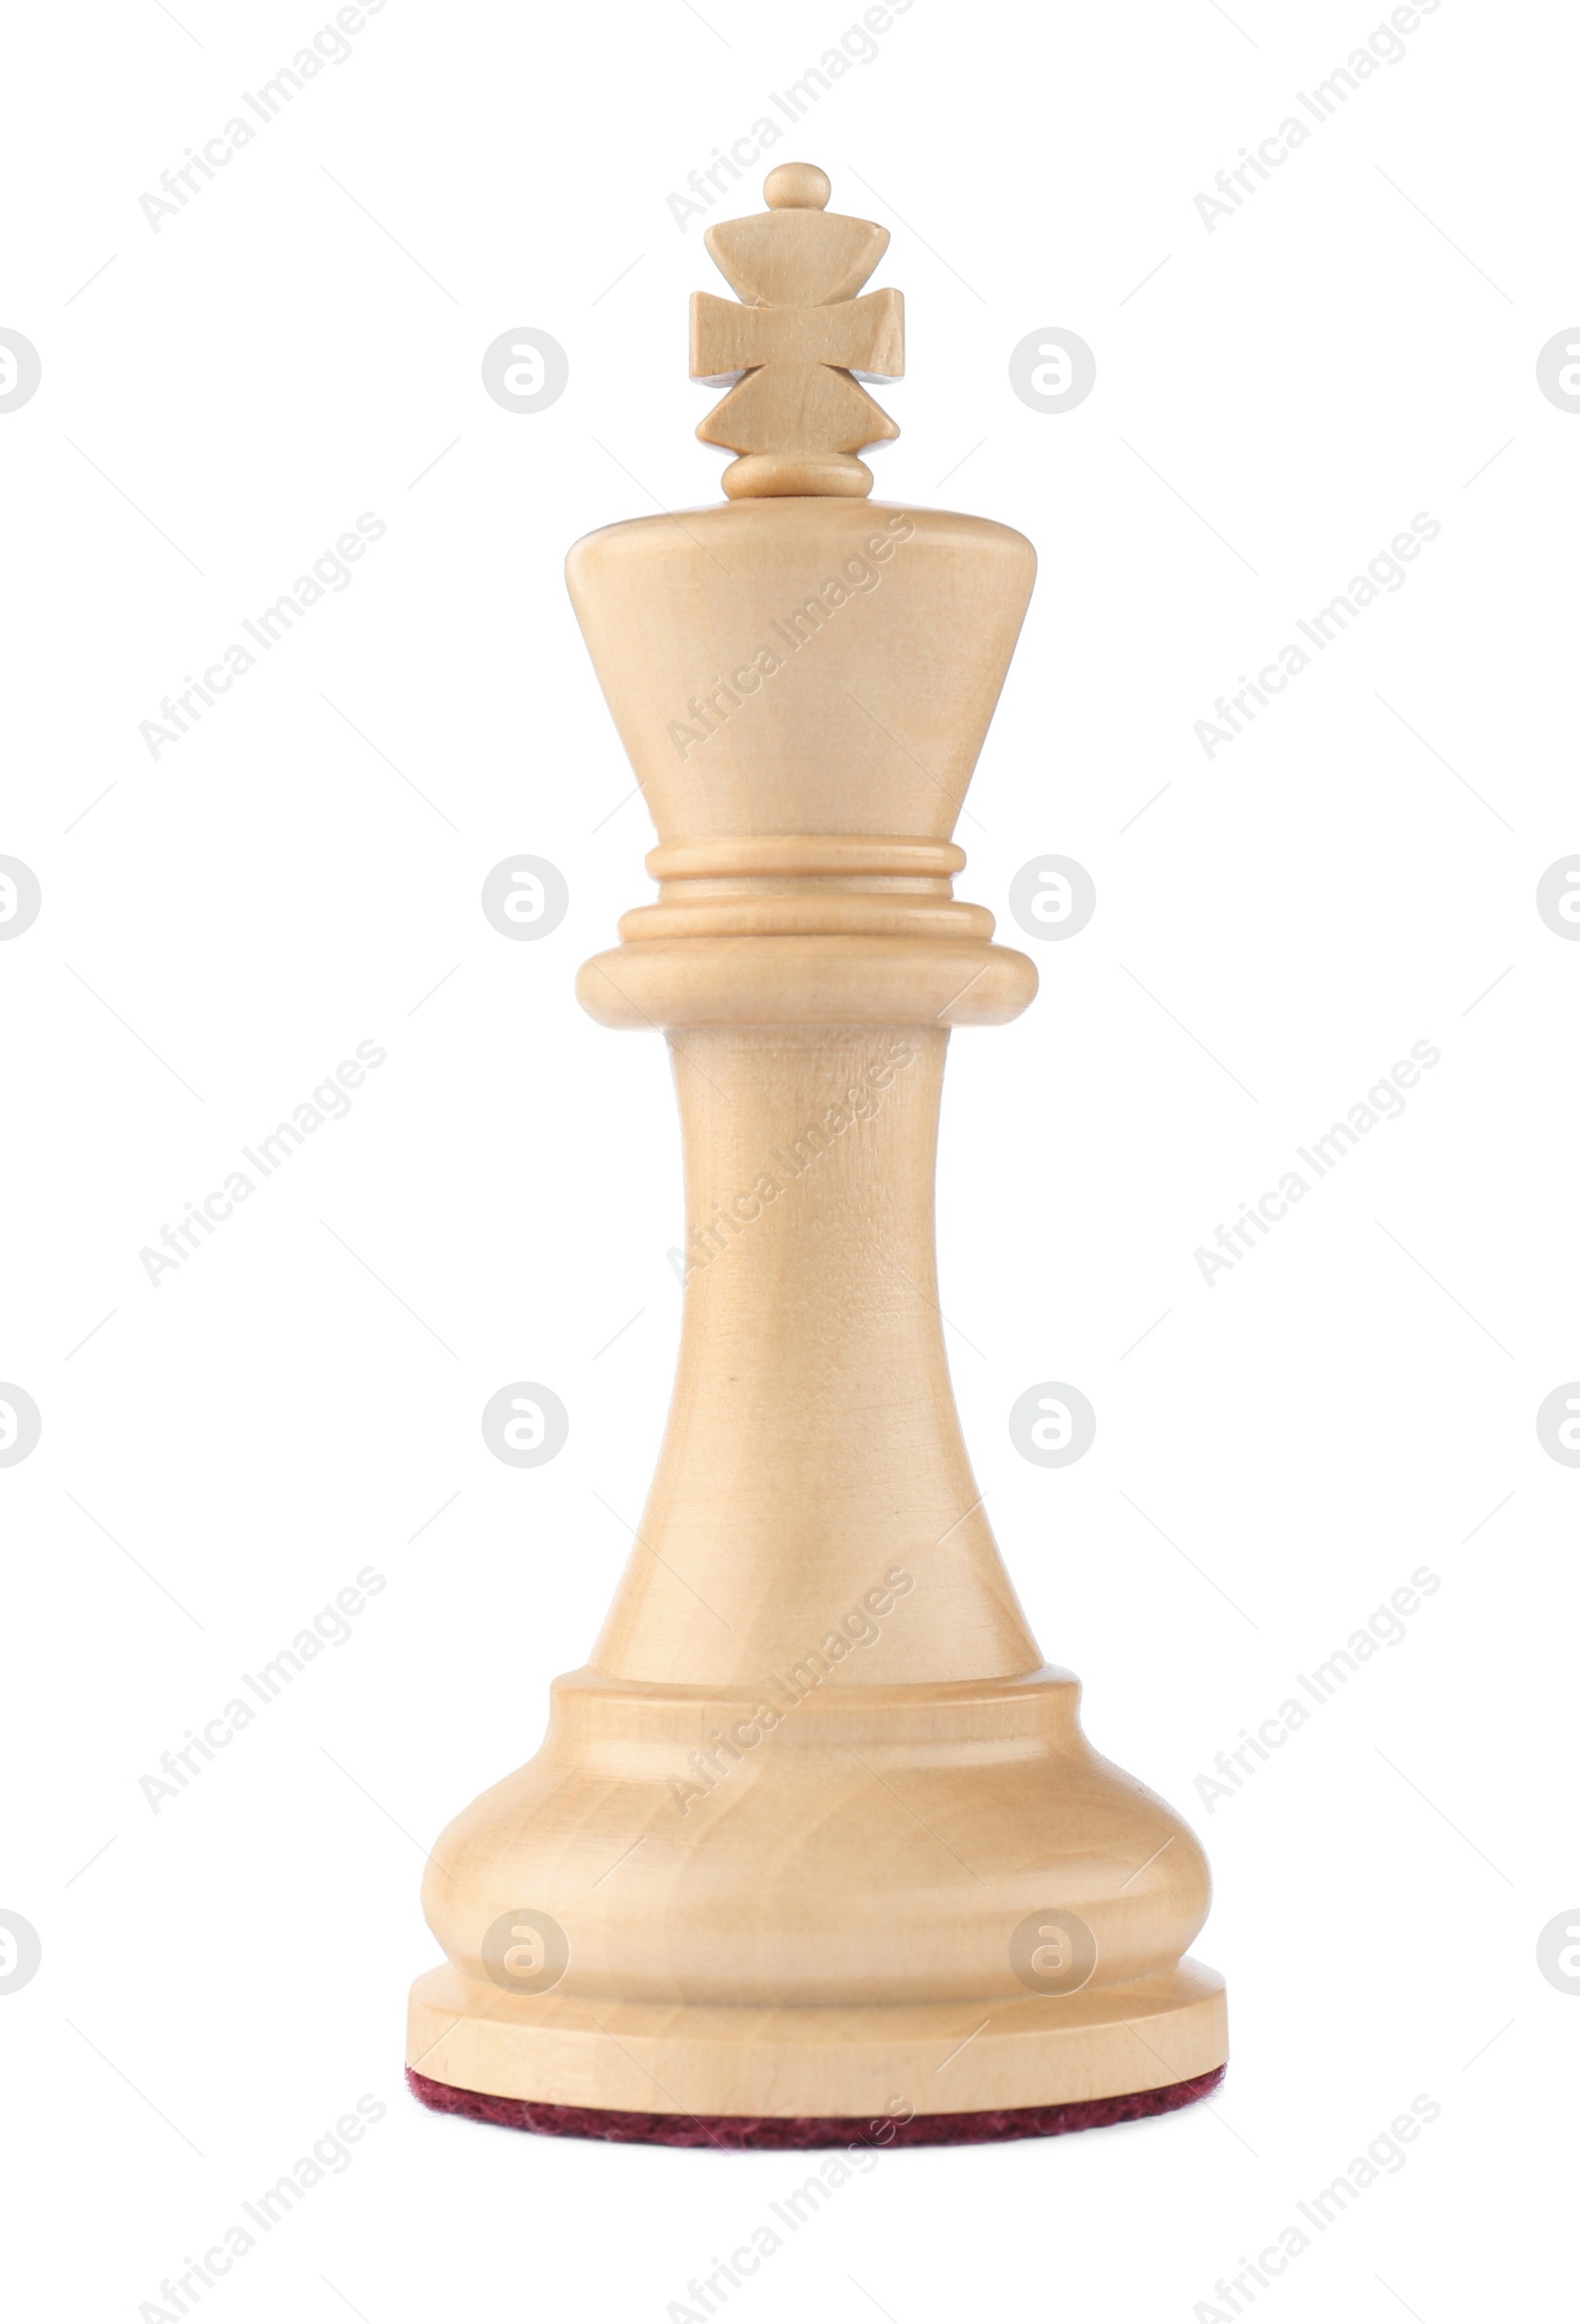 Photo of Wooden king isolated on white. Chess piece